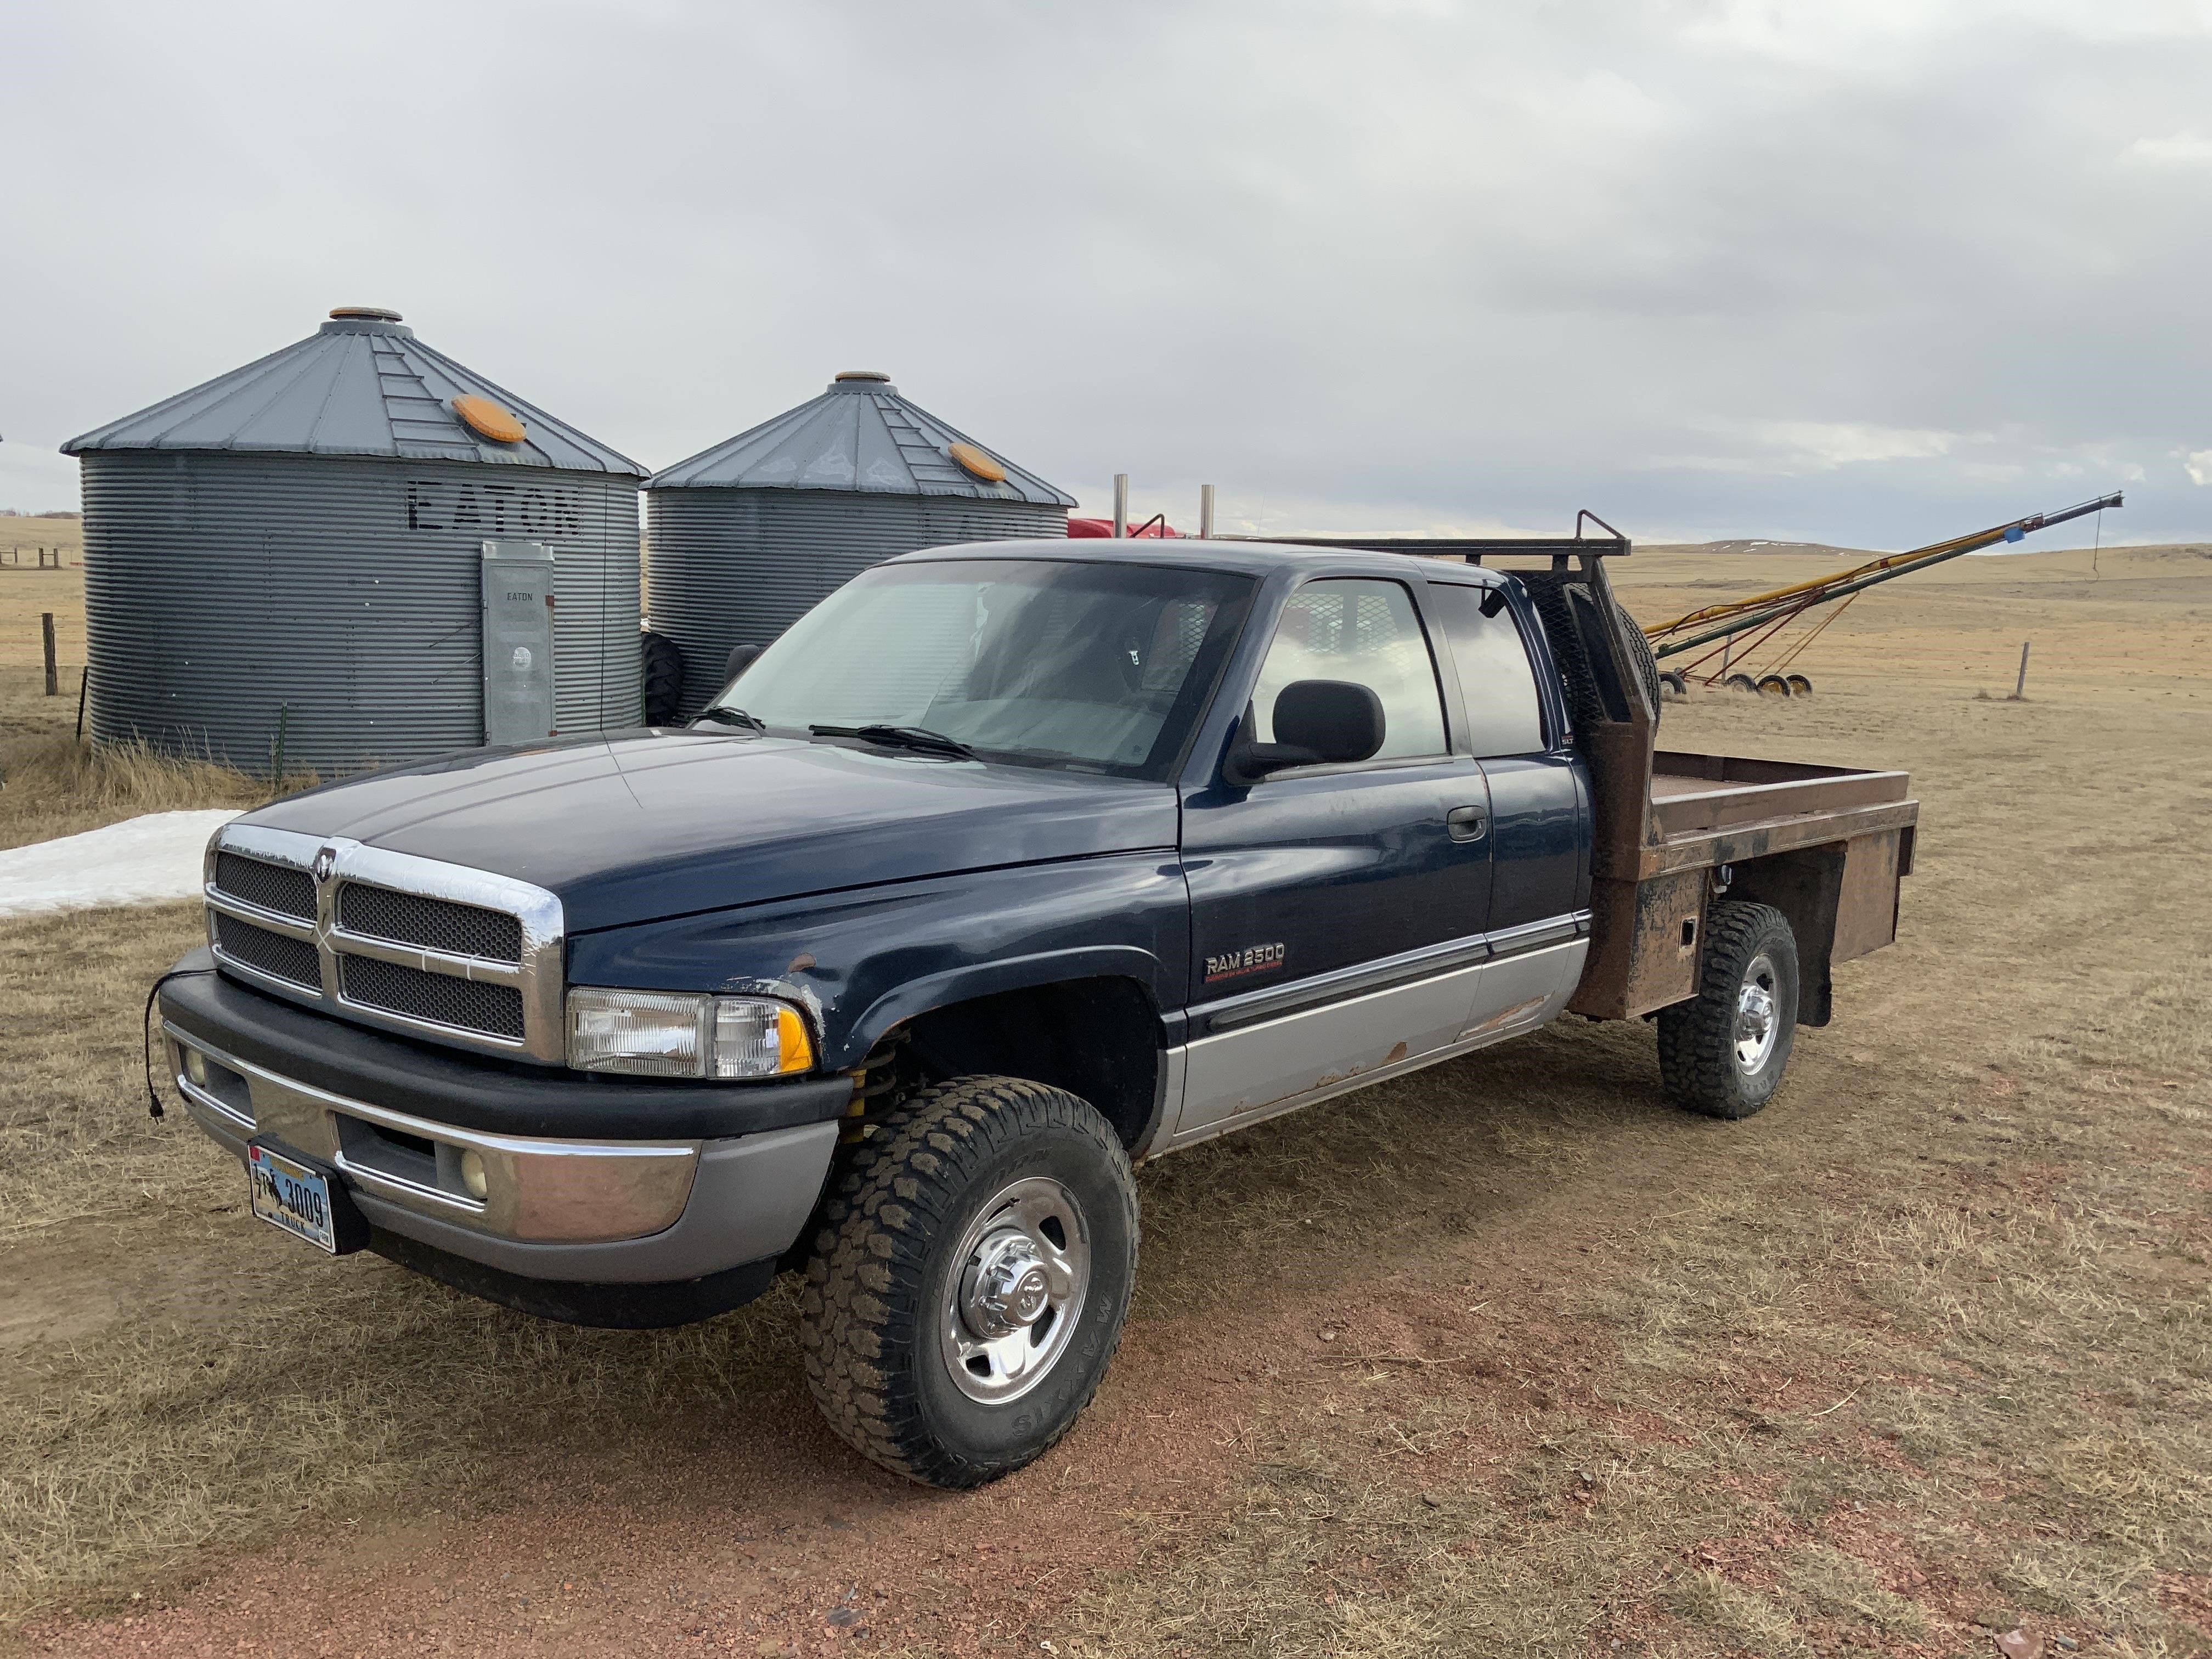 2001 Dodge RAM 2500 4x4 Extended Cab Flatbed Pickup BigIron Auctions